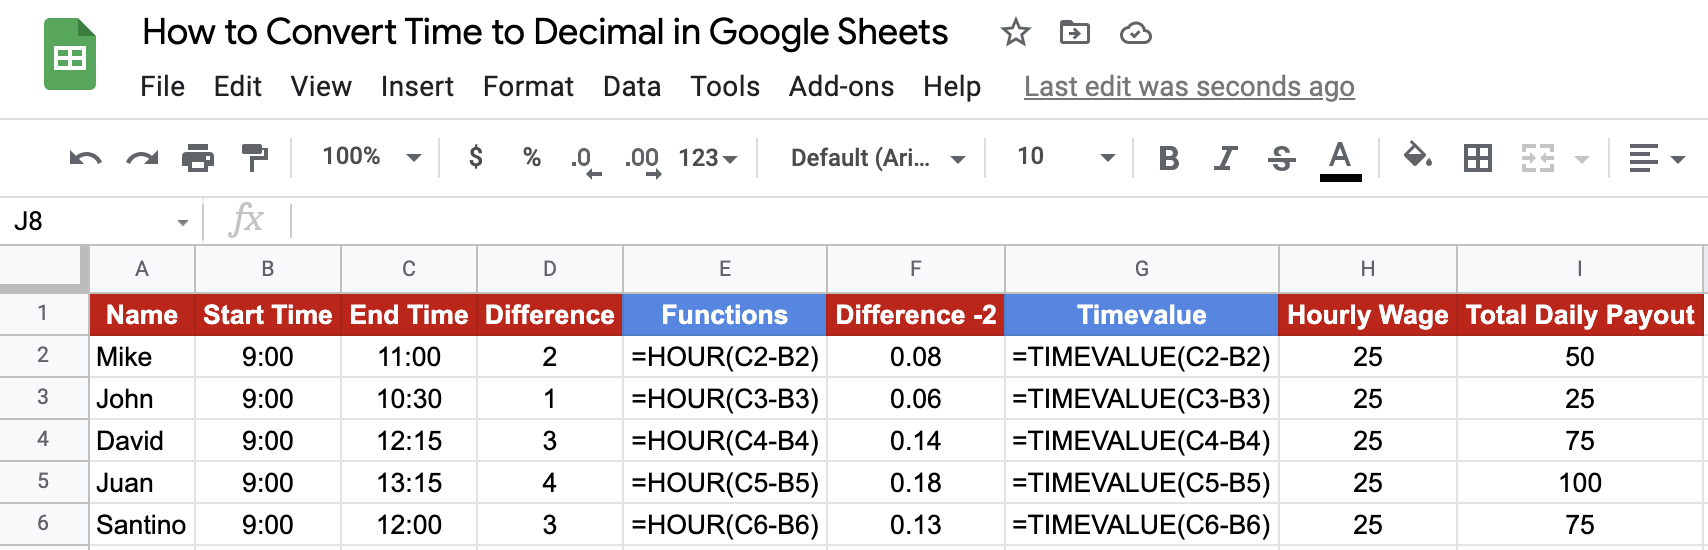 Time to Decimal in Google Sheets